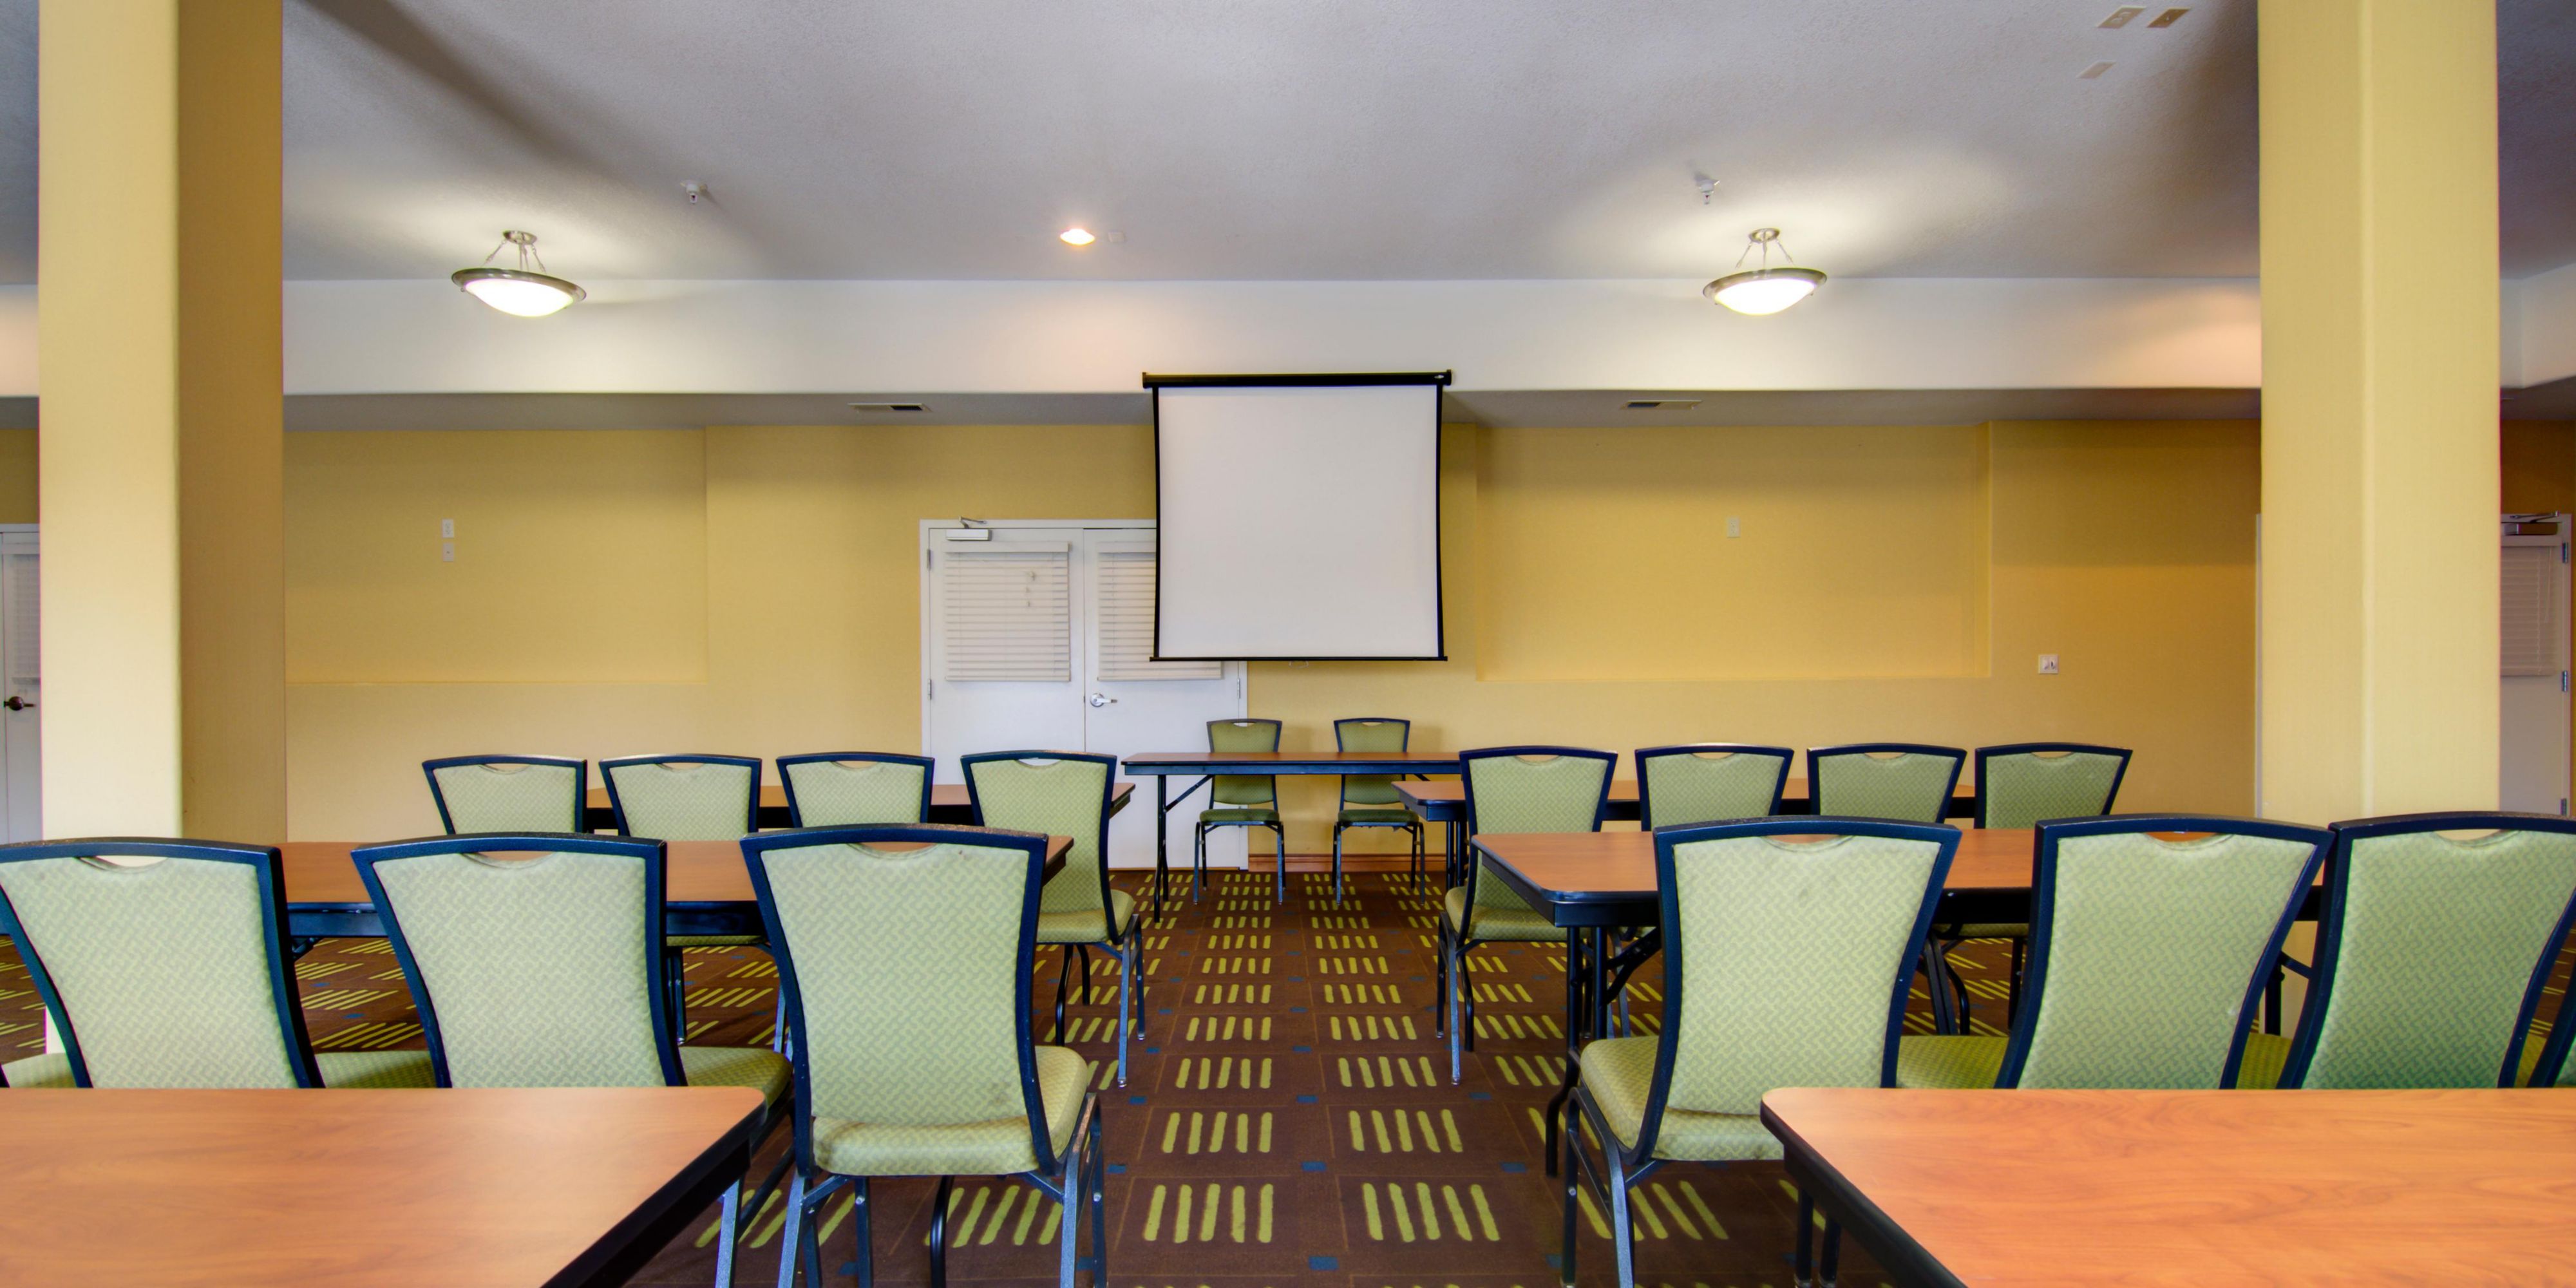 Small meetings play a vital role in the success of many organizations. Are you planning a small corporate meeting, board retreat or brainstorming session? Come and plan your meeting with us